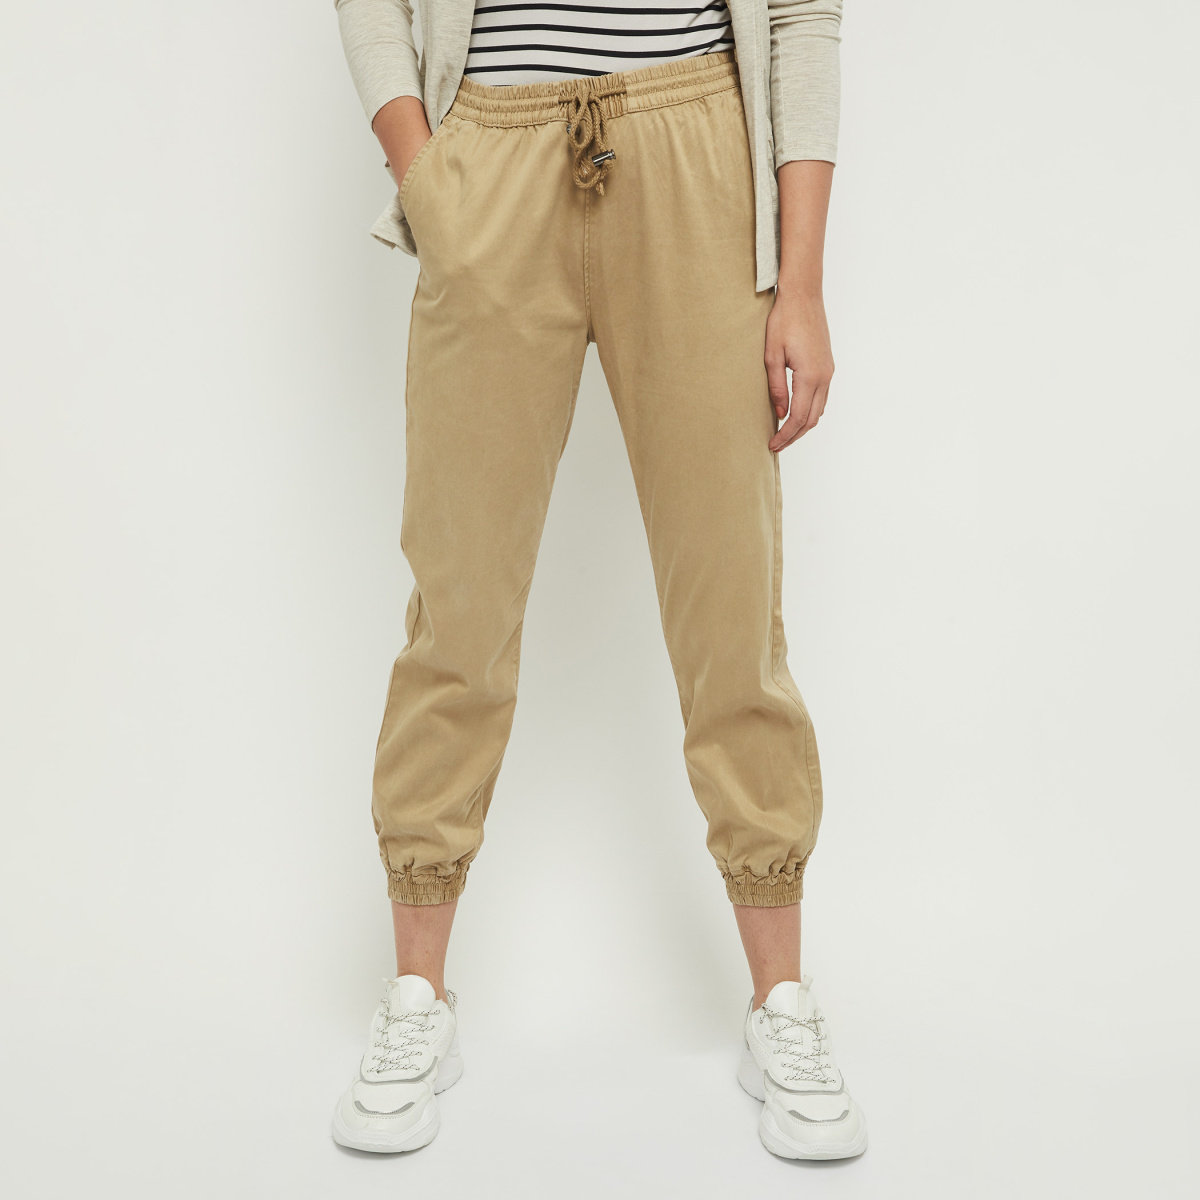 Buy OLIVE GREEN Trousers  Pants for Men by max Online  Ajiocom